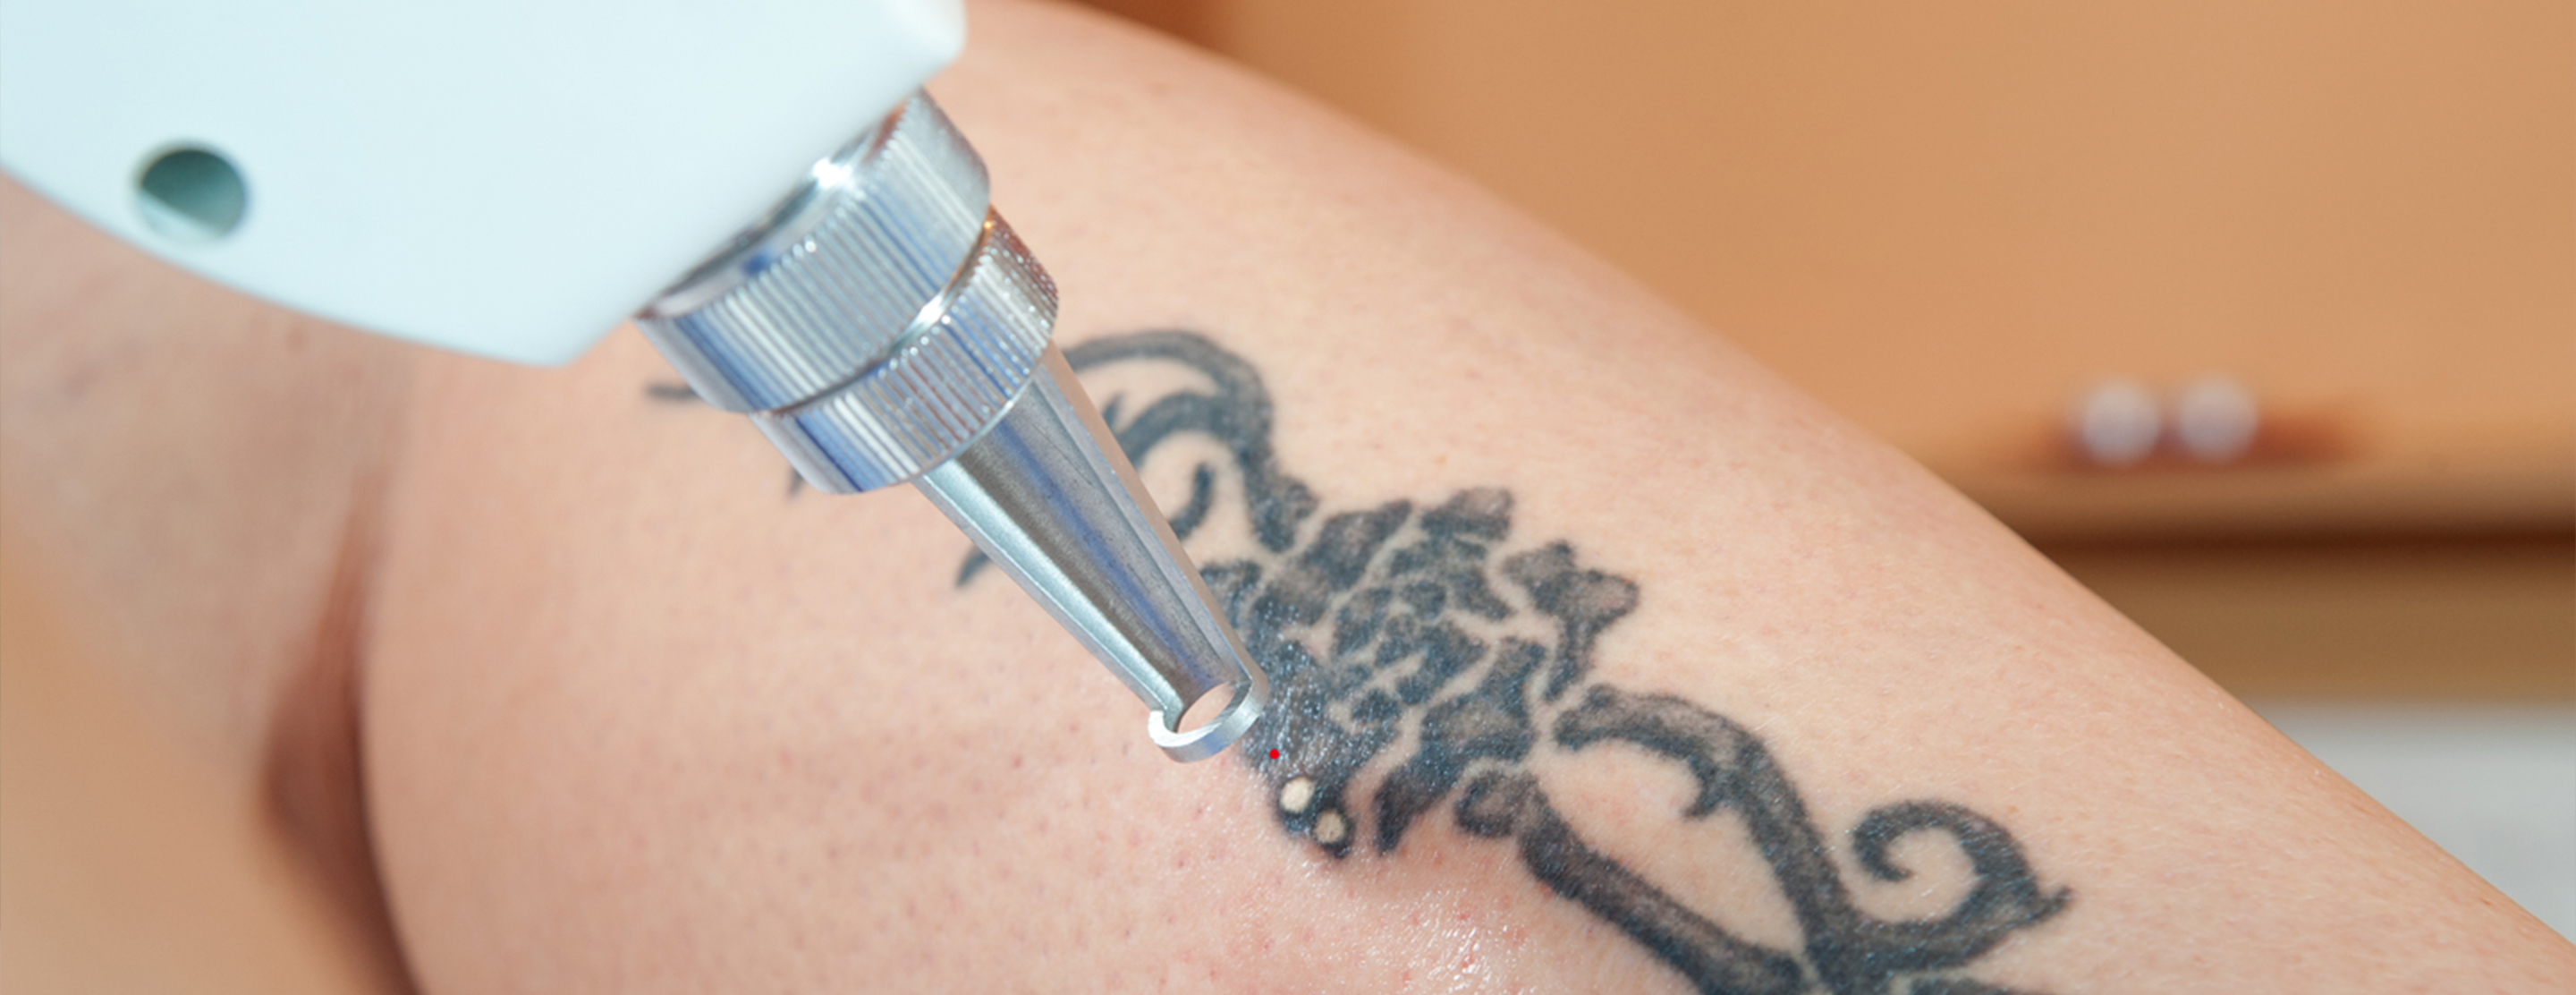 Tattoo Removal Cost, London Laser , London